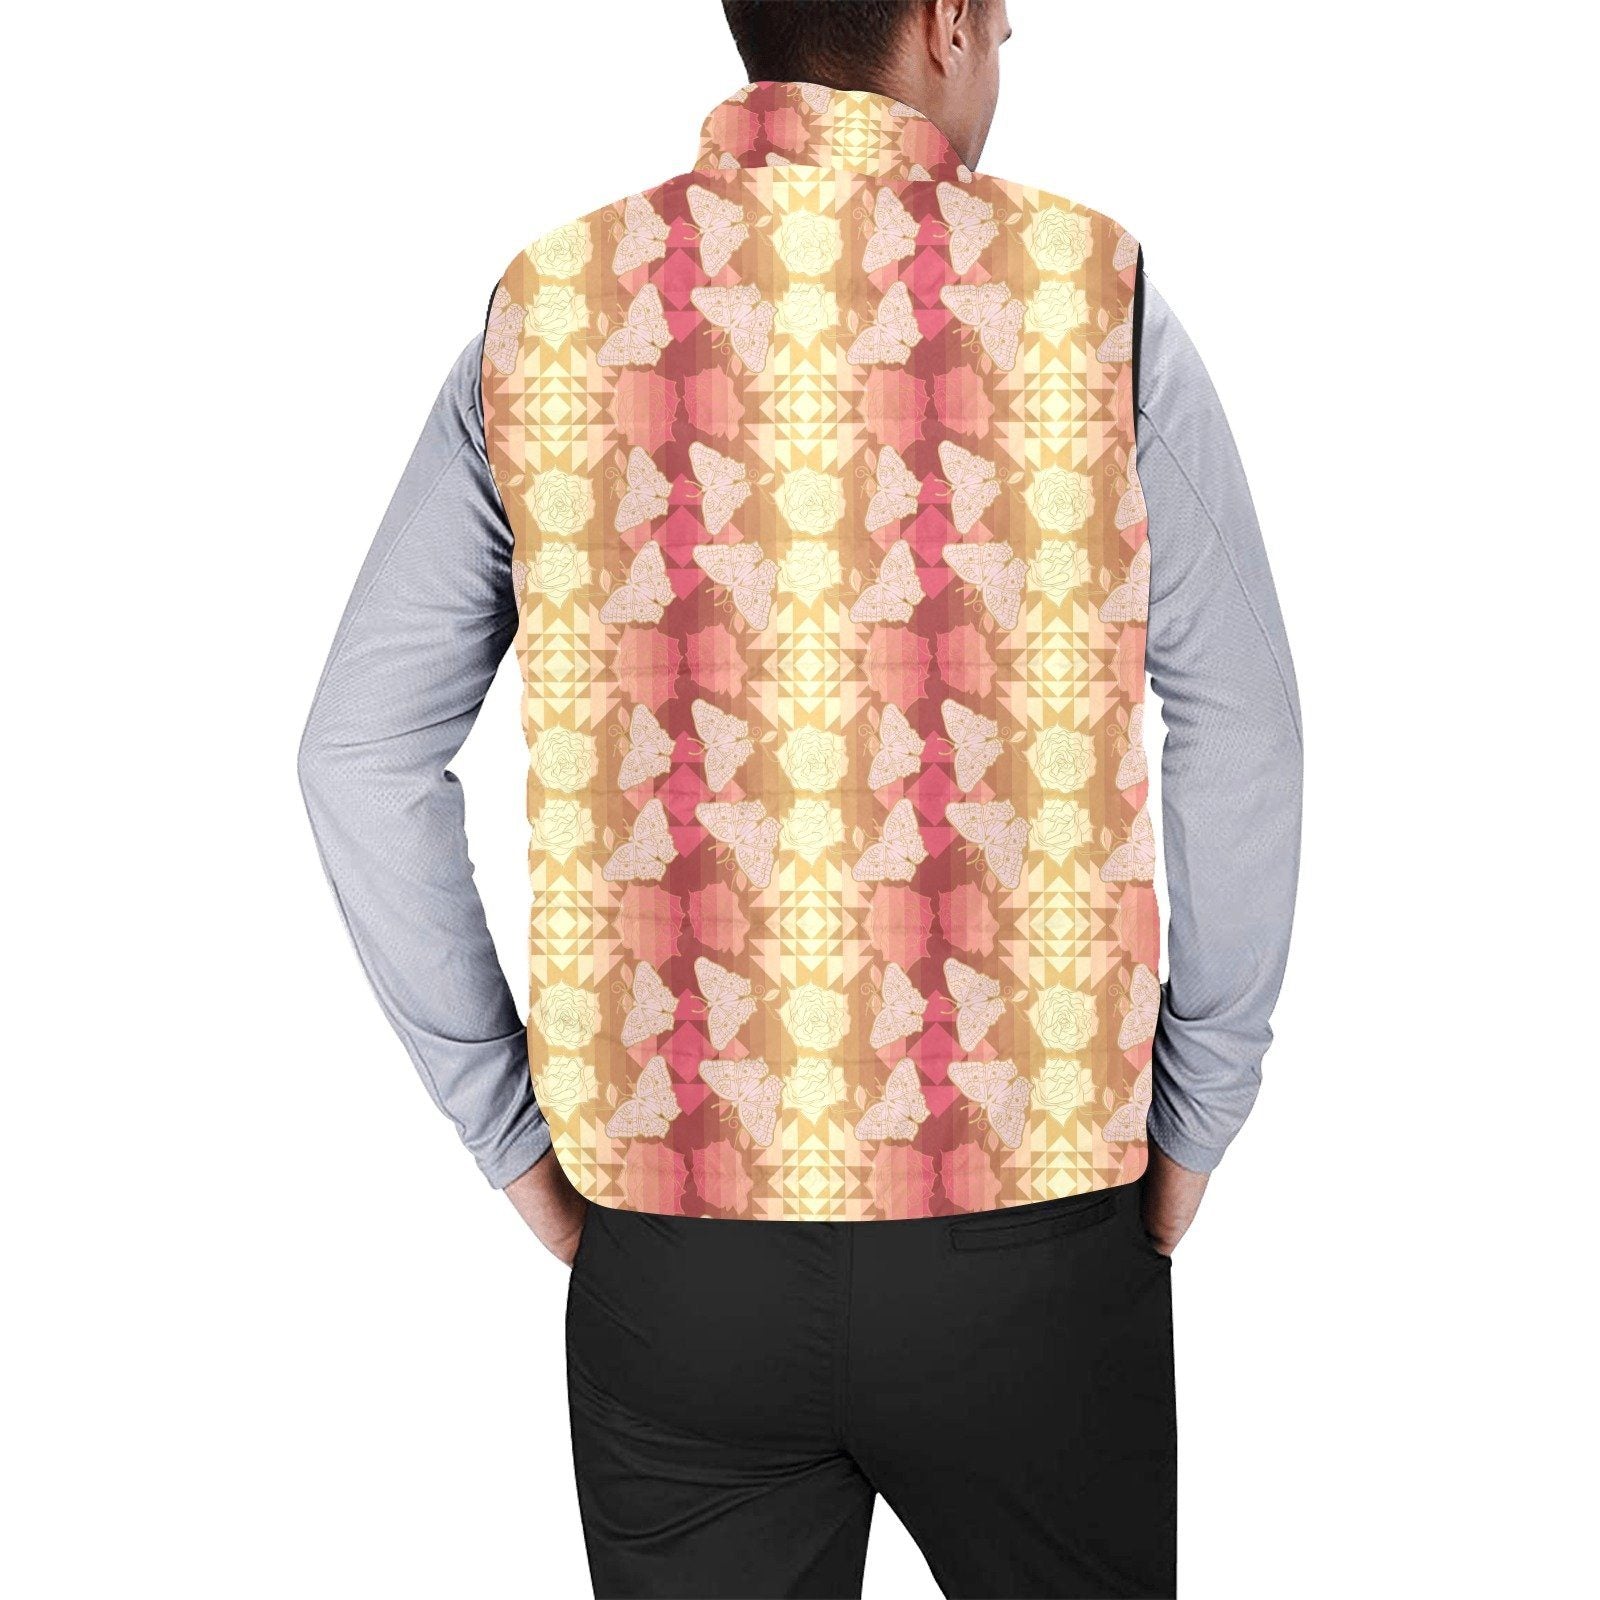 Butterfly and Roses on Geometric Men's Padded Vest Jacket (Model H44) Men's Padded Vest Jacket (H44) e-joyer 